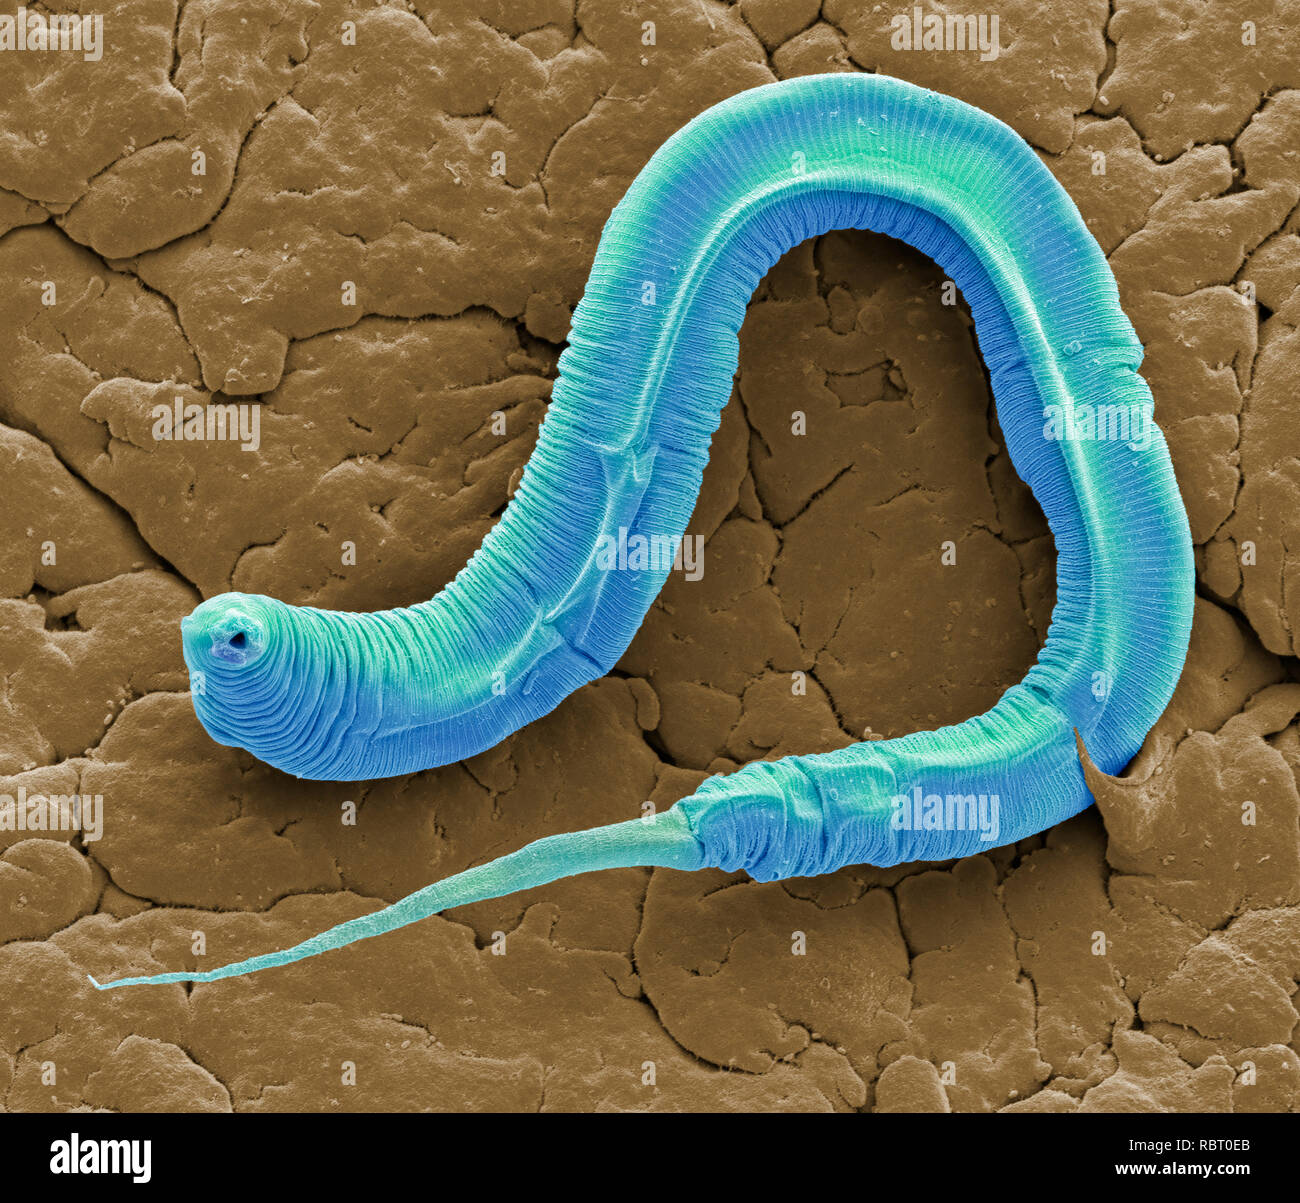 Caenorhabditis elegans worm, coloured scanning electron micrograph (SEM). C. elegans is a soil-dwelling hermaphrodite nematode worm and one of the most studied animals in biological and genetic research. A tendency to reproduce by self-fertilisation (resulting in identical offspring), along with the short time taken to reach maturity, make this tiny worm an ideal subject. Magnification: x1300 when printed at 10 centimetres wide. Stock Photo